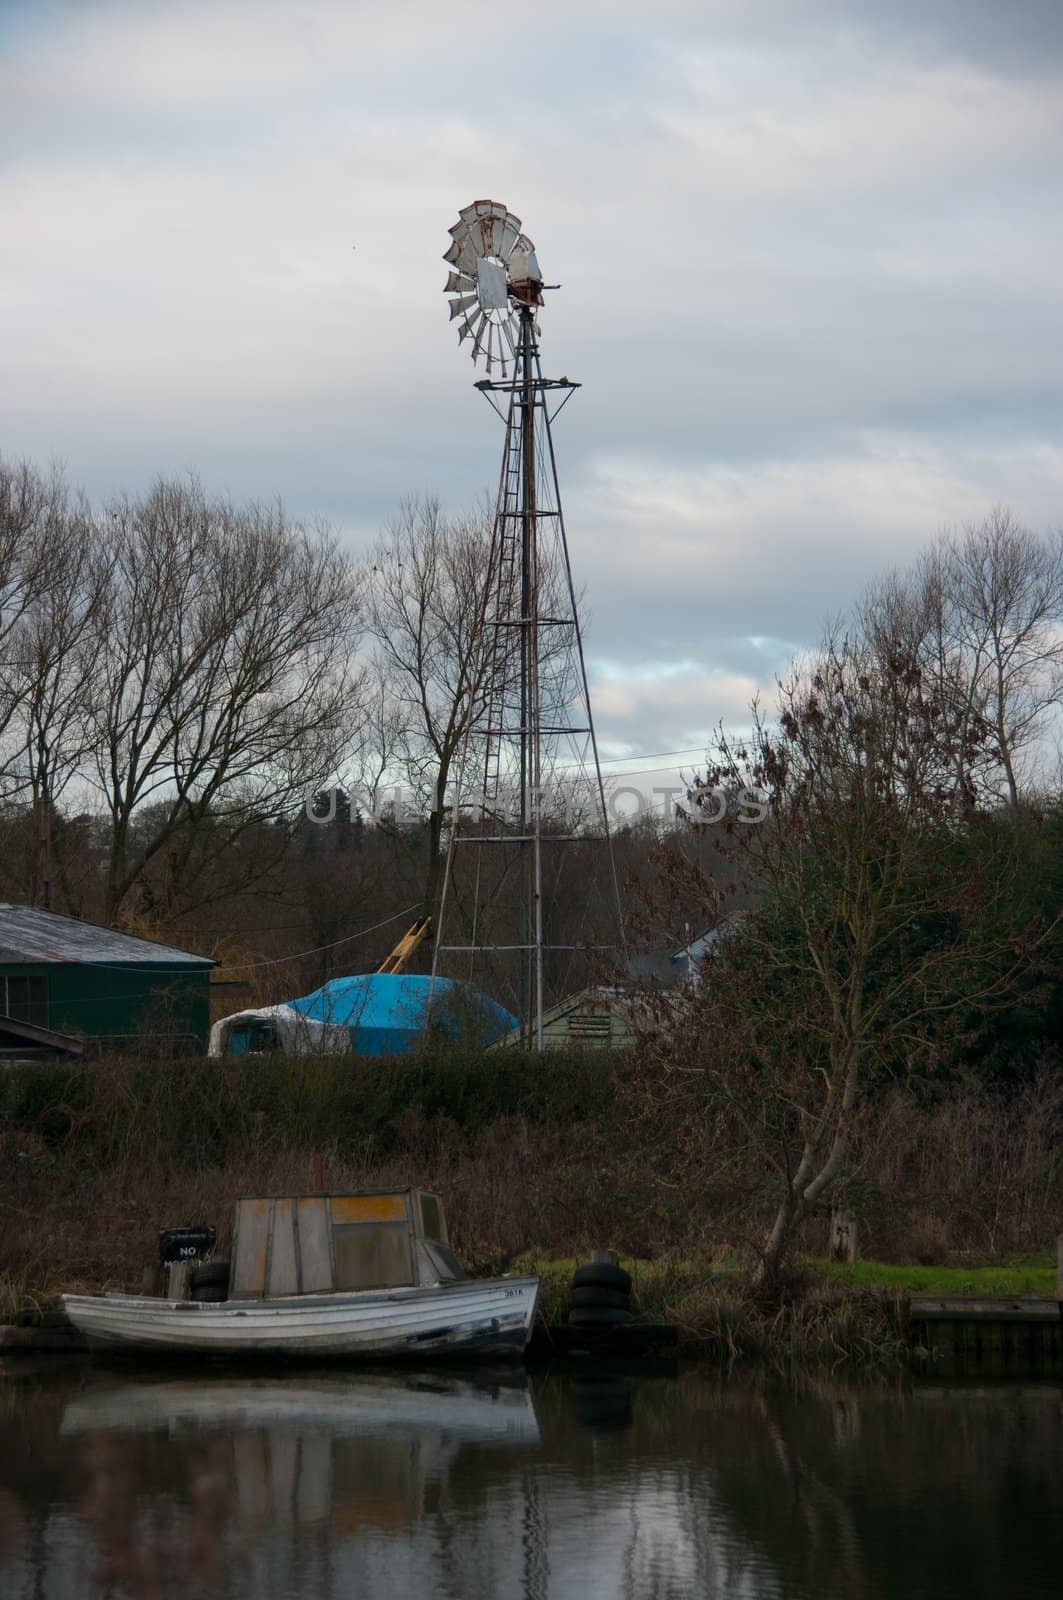 wind turbine on the banks of the river Yare near Norwich